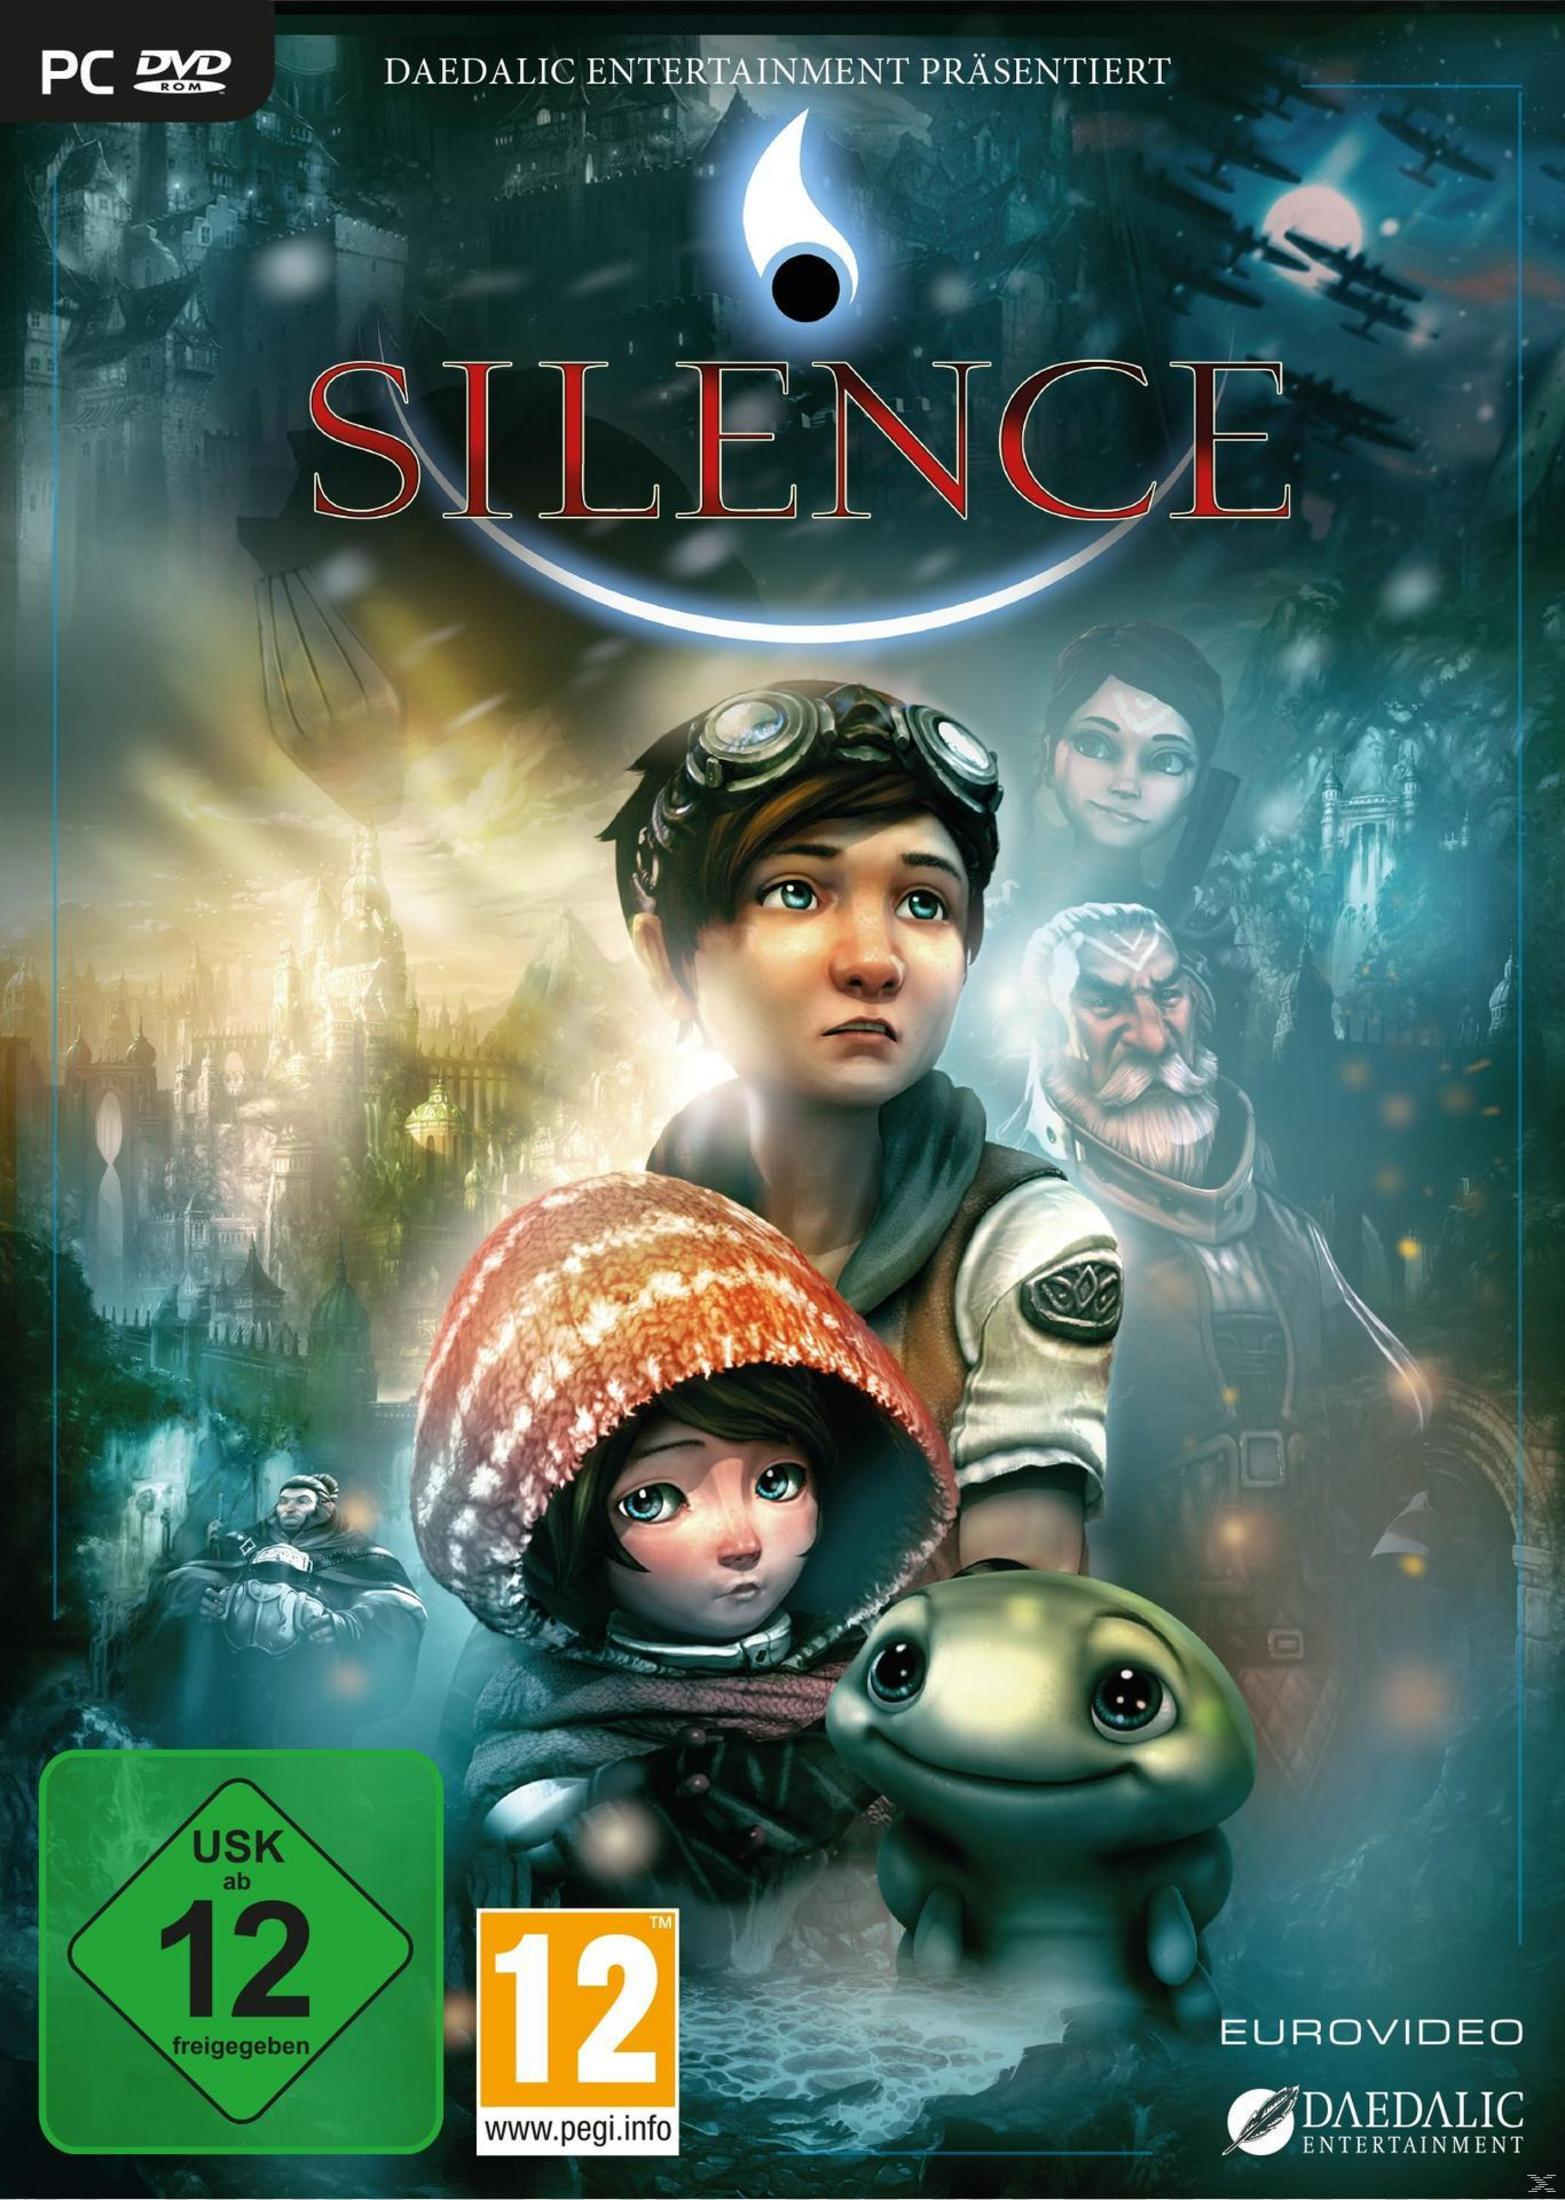 The - [PC] Whispered Silence World - 2